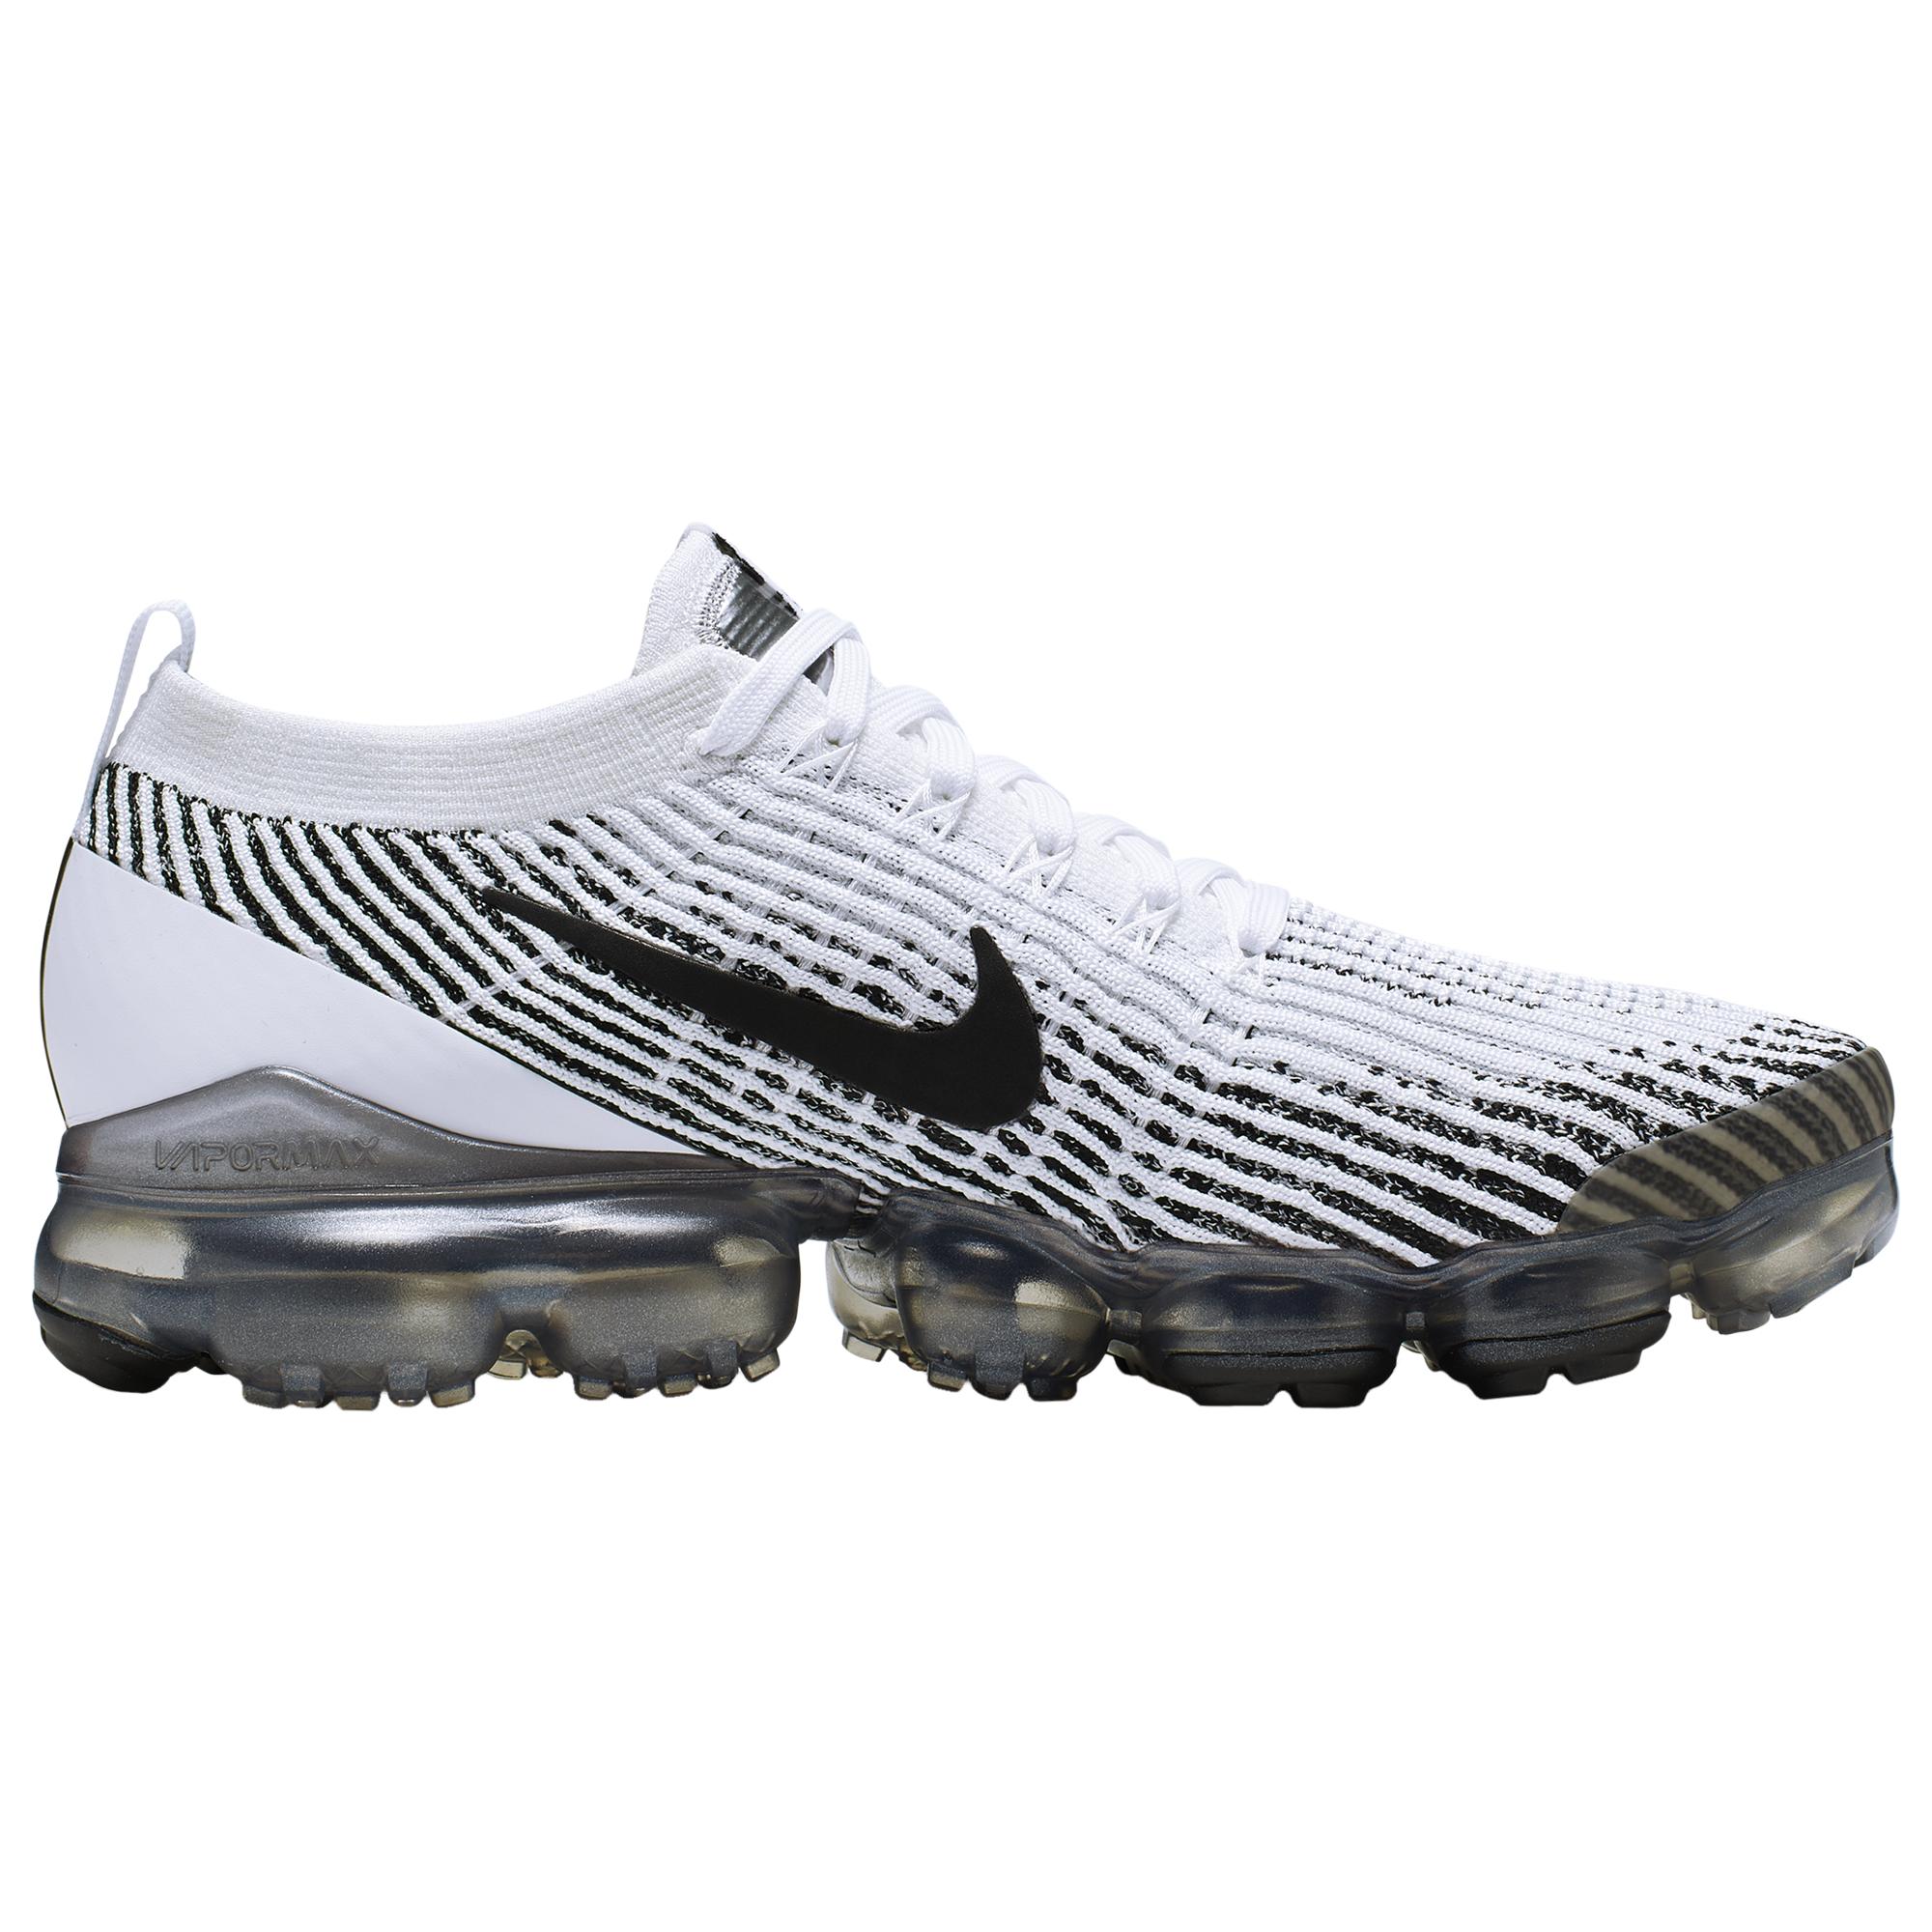 nike vapormax flyknit 3 white and black